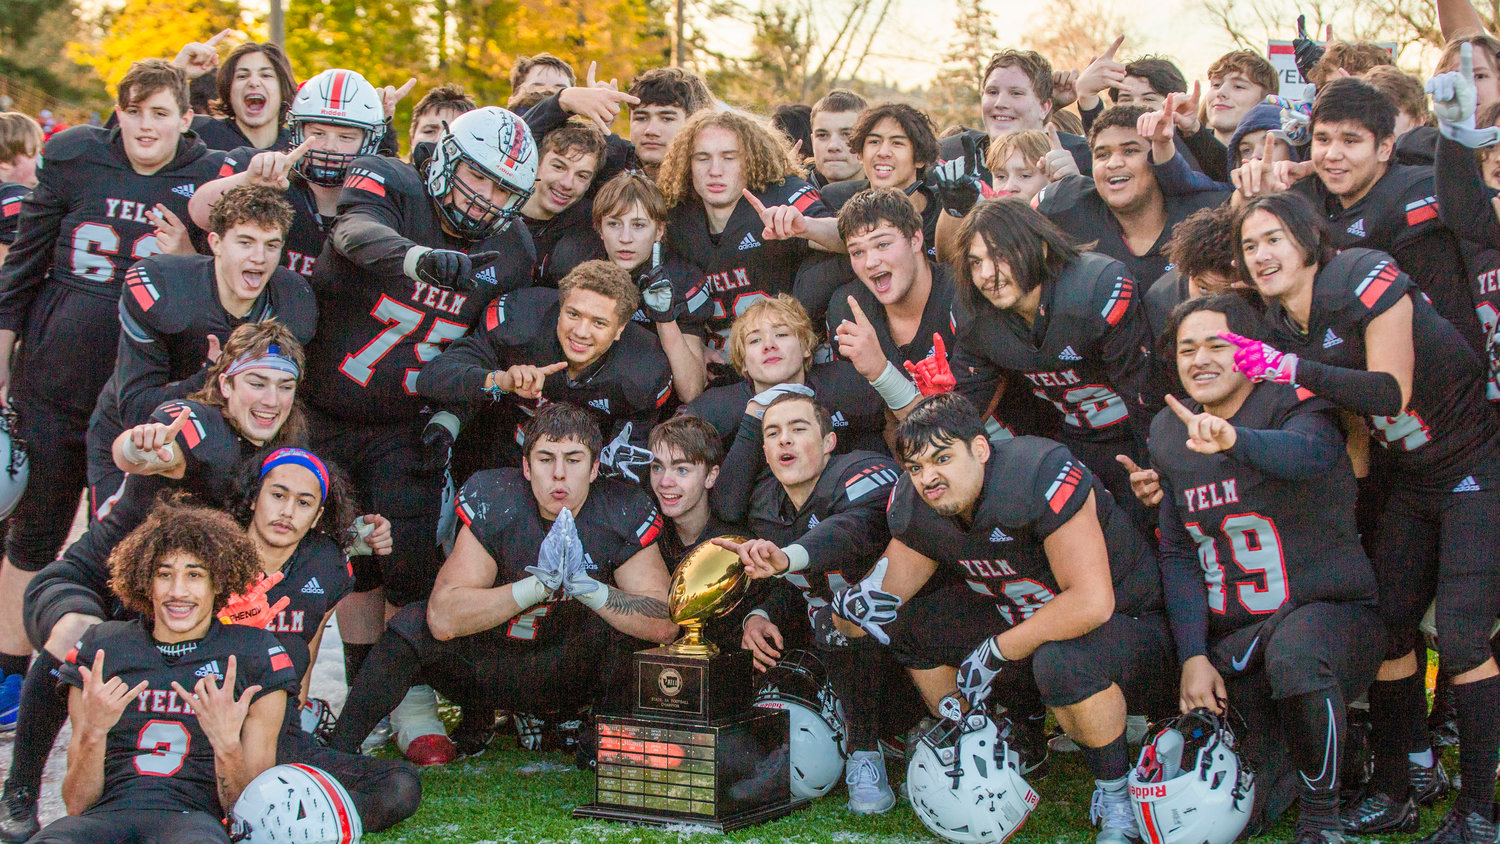 The Yelm football team poses with the 3A state trophy after its 20-13 win over Eastside Catholic in Puyallup on Dec. 3.